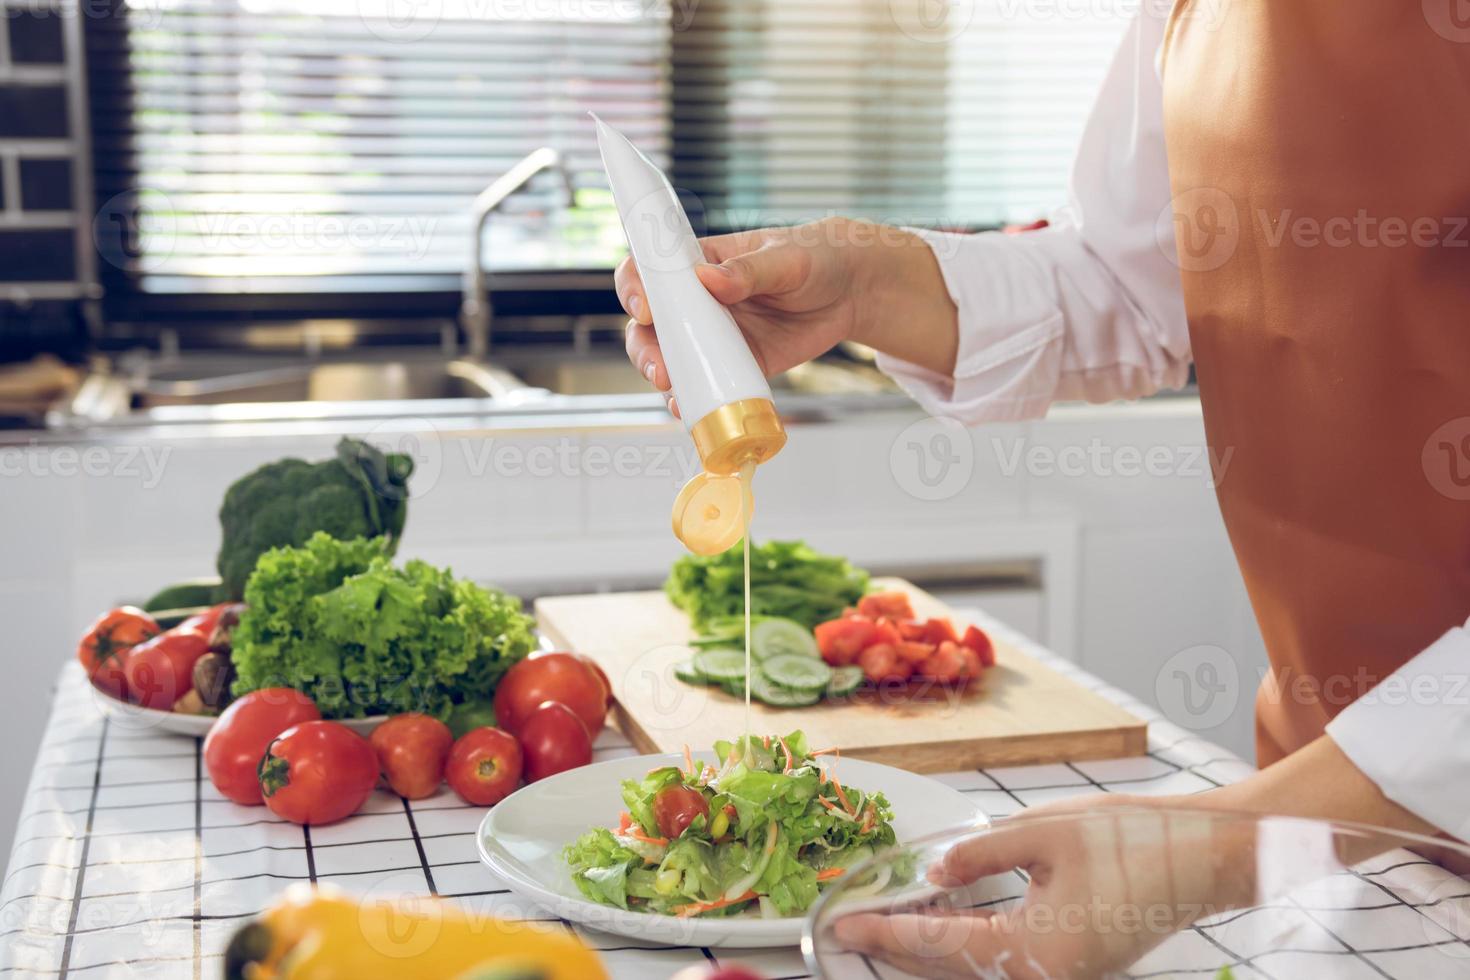 https://static.vecteezy.com/system/resources/previews/006/584/811/non_2x/asian-woman-squeezes-mayonnaise-on-a-salad-plate-at-the-kitchen-cooking-table-photo.jpg